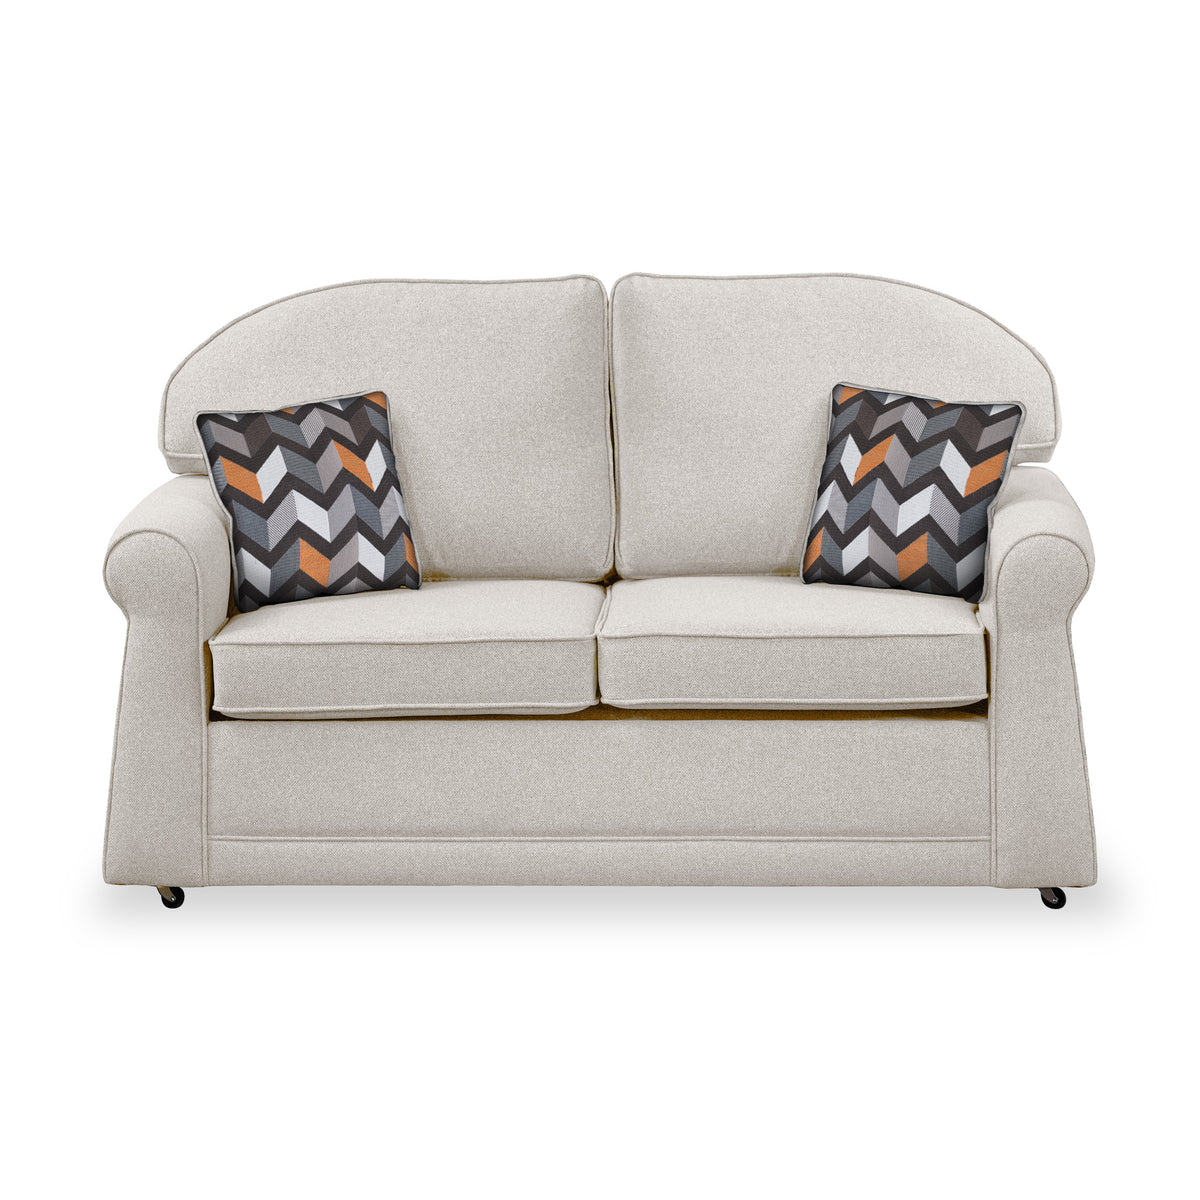 Giselle Oatmeal Soft Weave 2 Seater Sofabed with Charcoal Scatter Cushions from Roseland Furniture